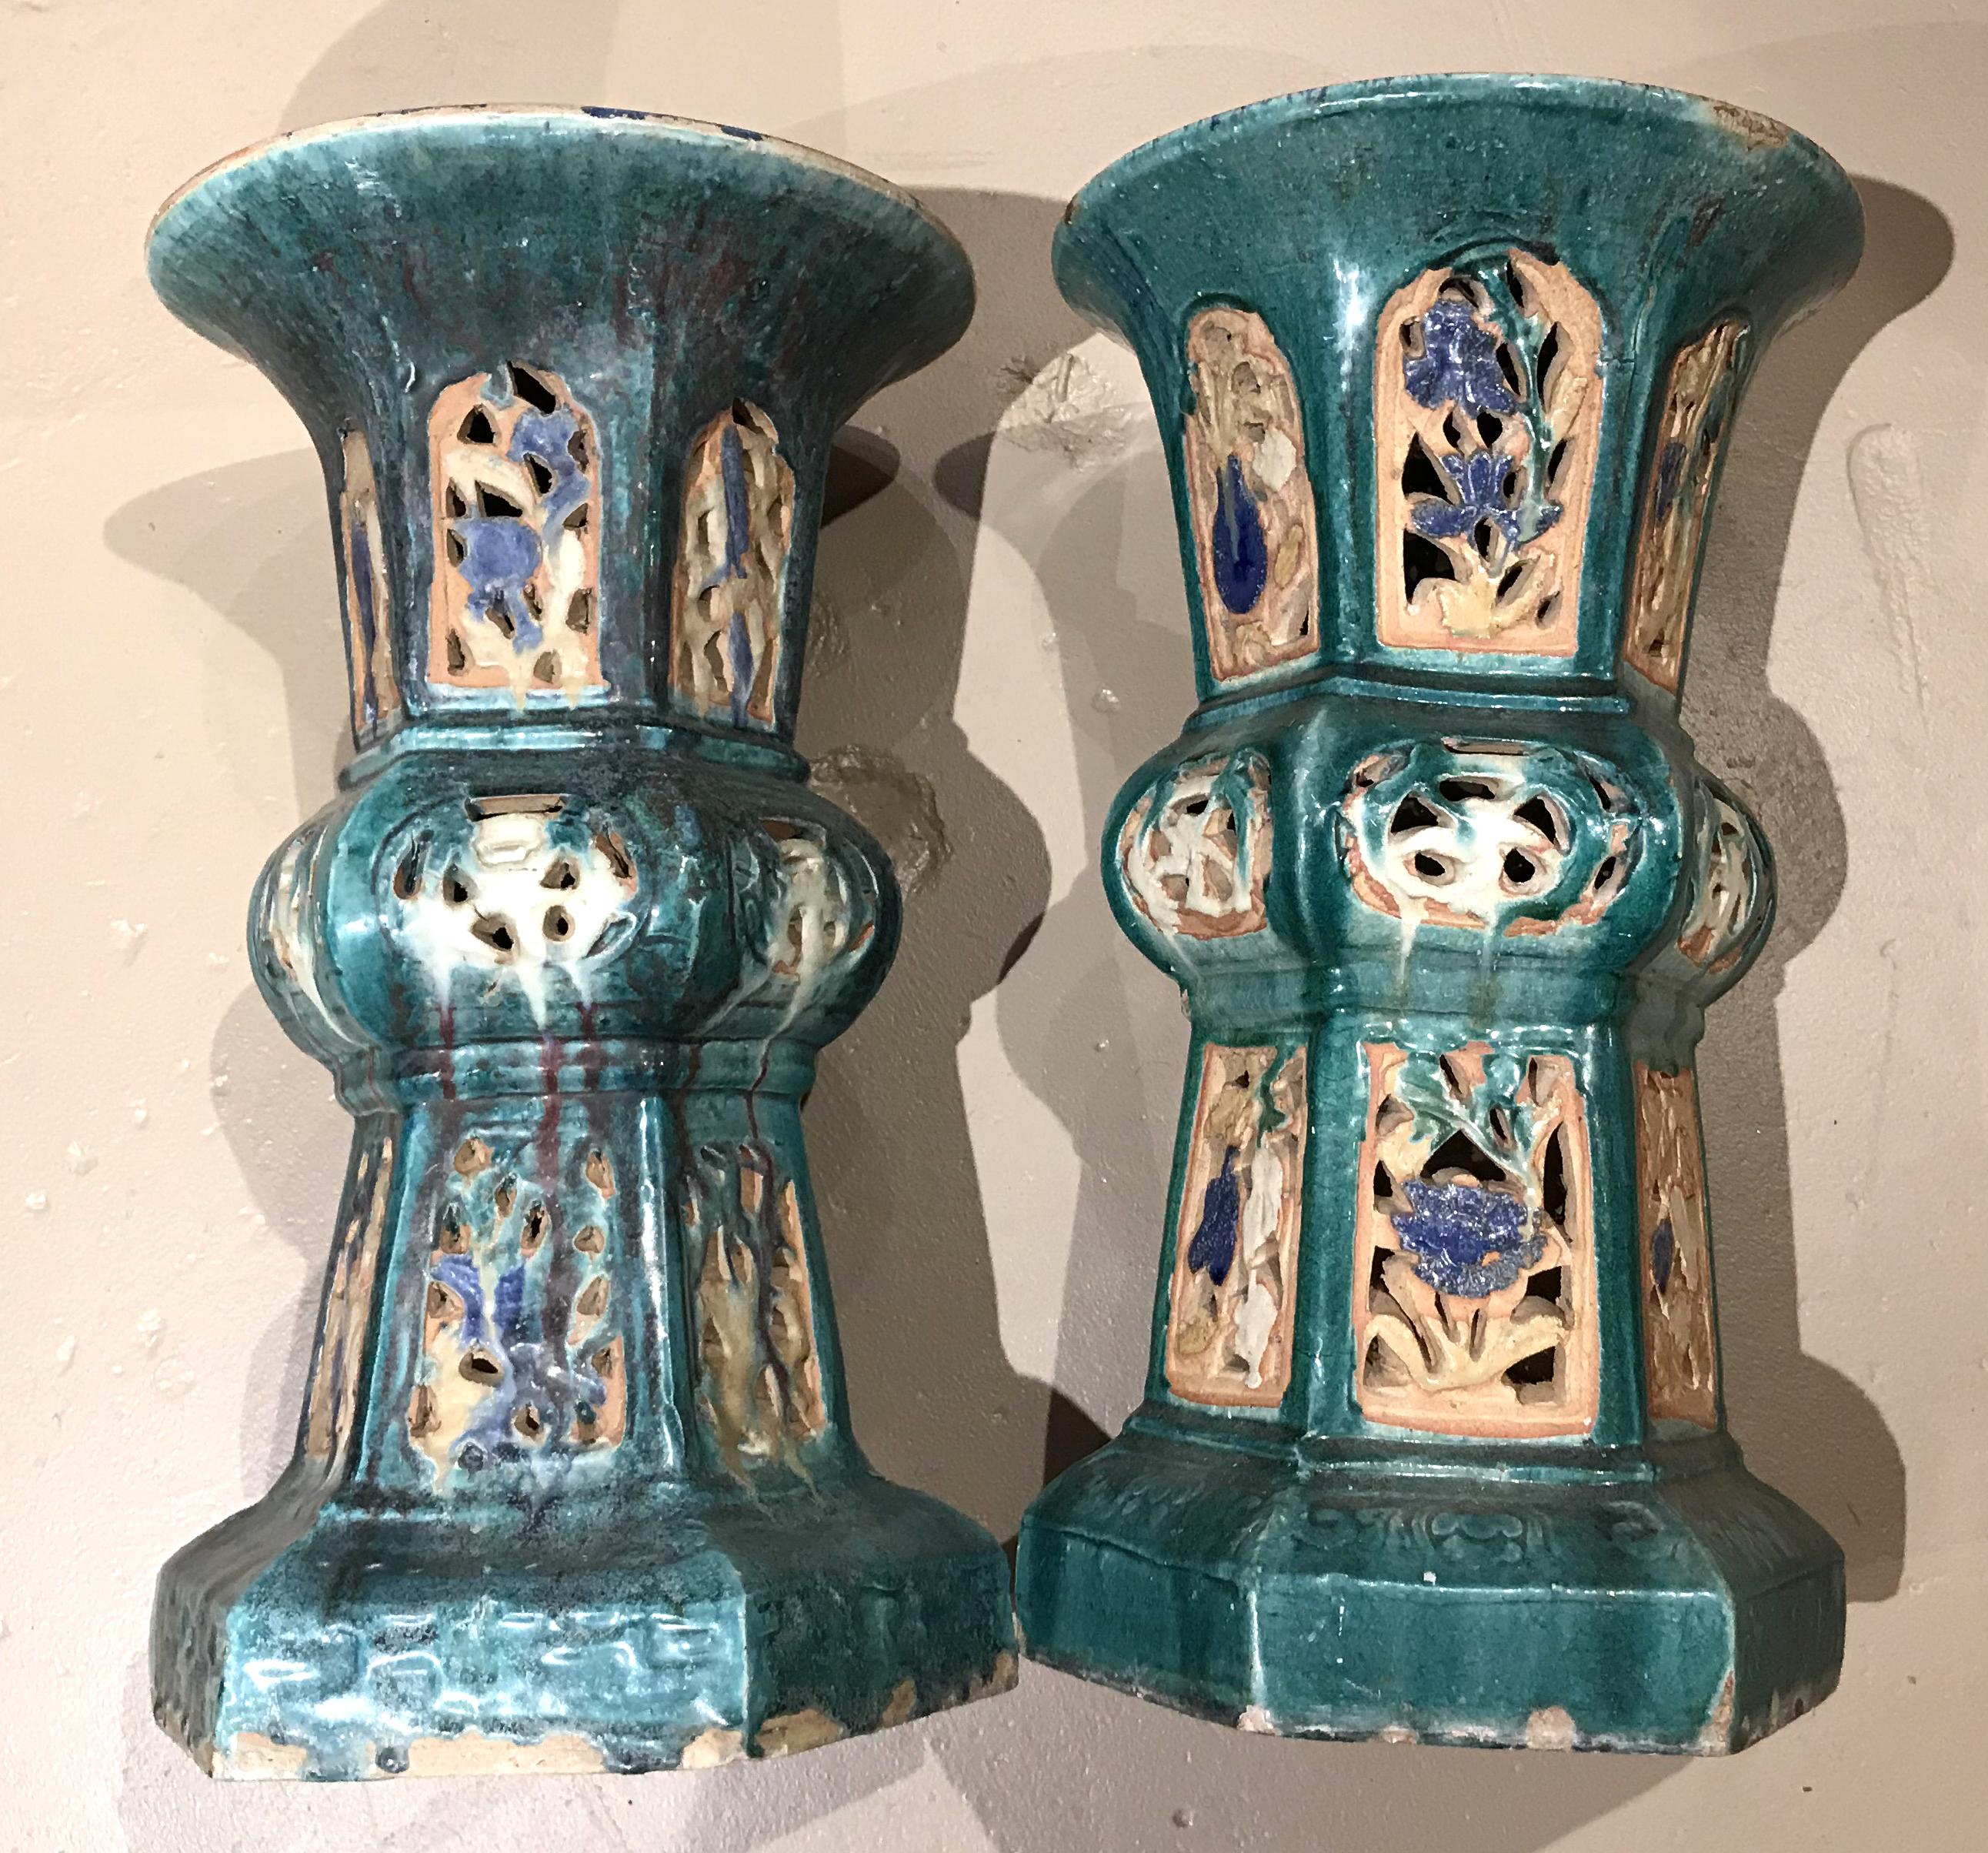 Polychromed Pair of 19th Century Chinese Ceramic Reticulated Garden Pedestals or Stands